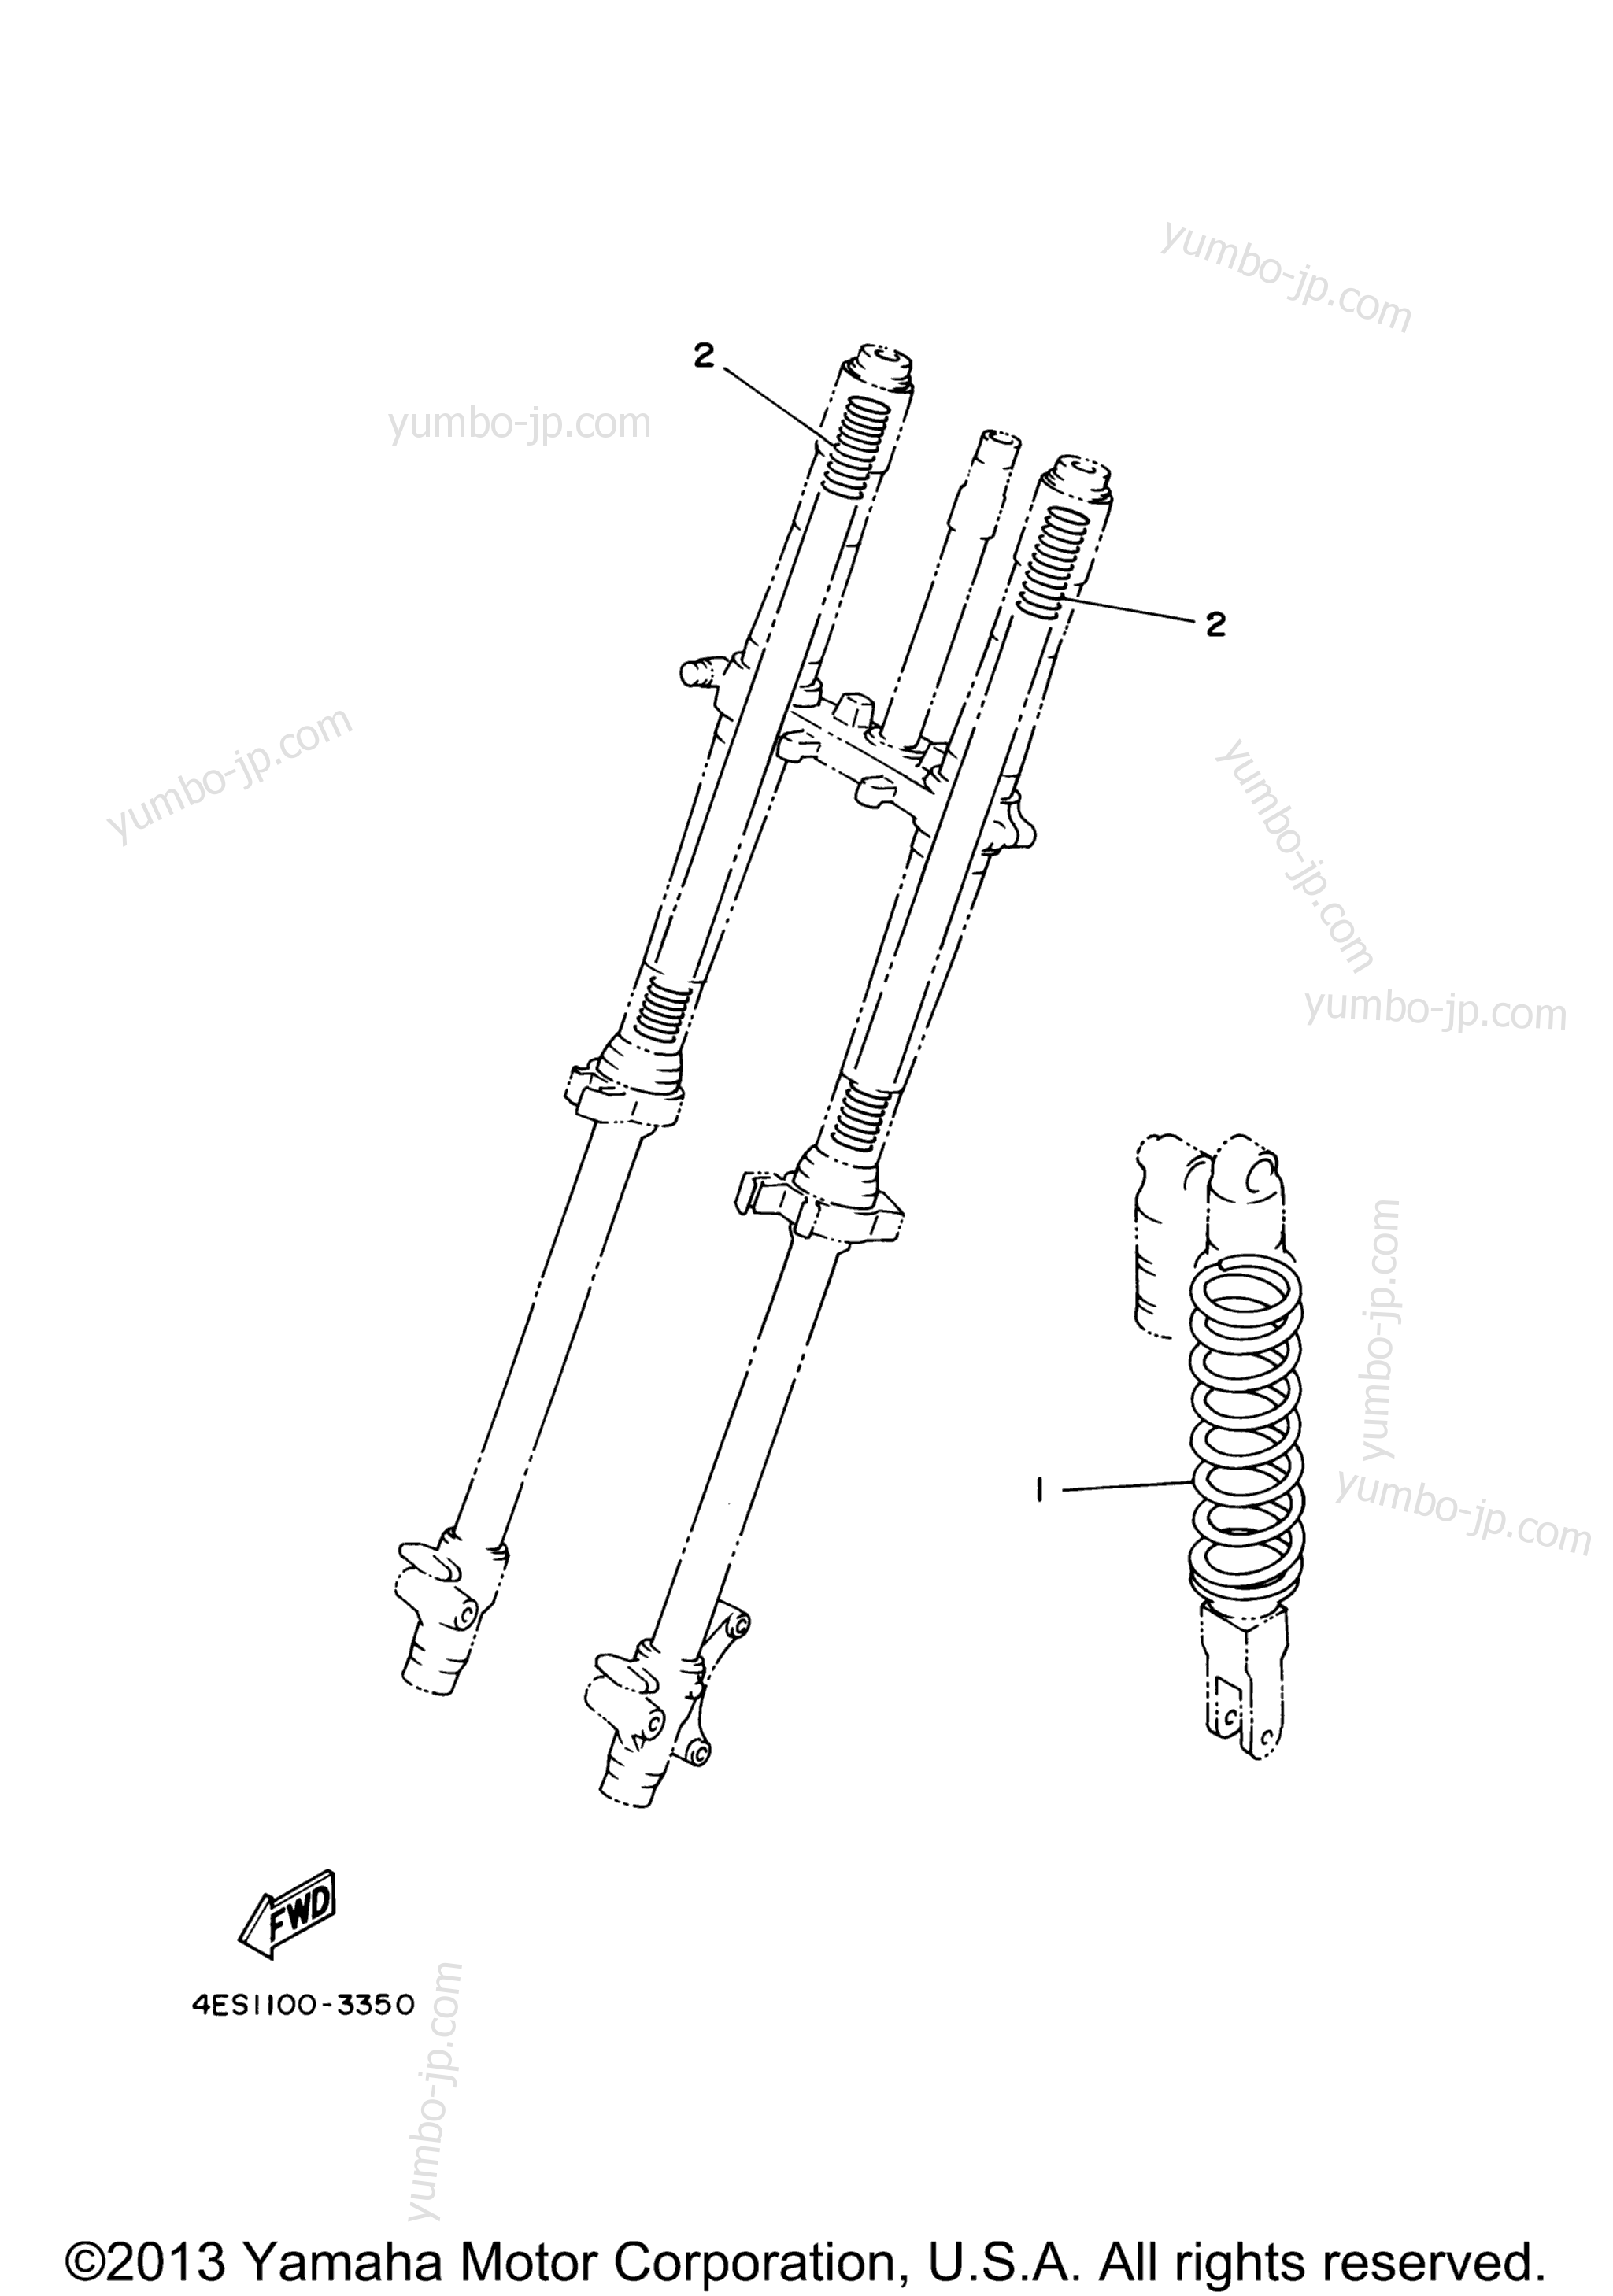 Alternate For Chassis for motorcycles YAMAHA YZ85 (YZ85B) 2012 year